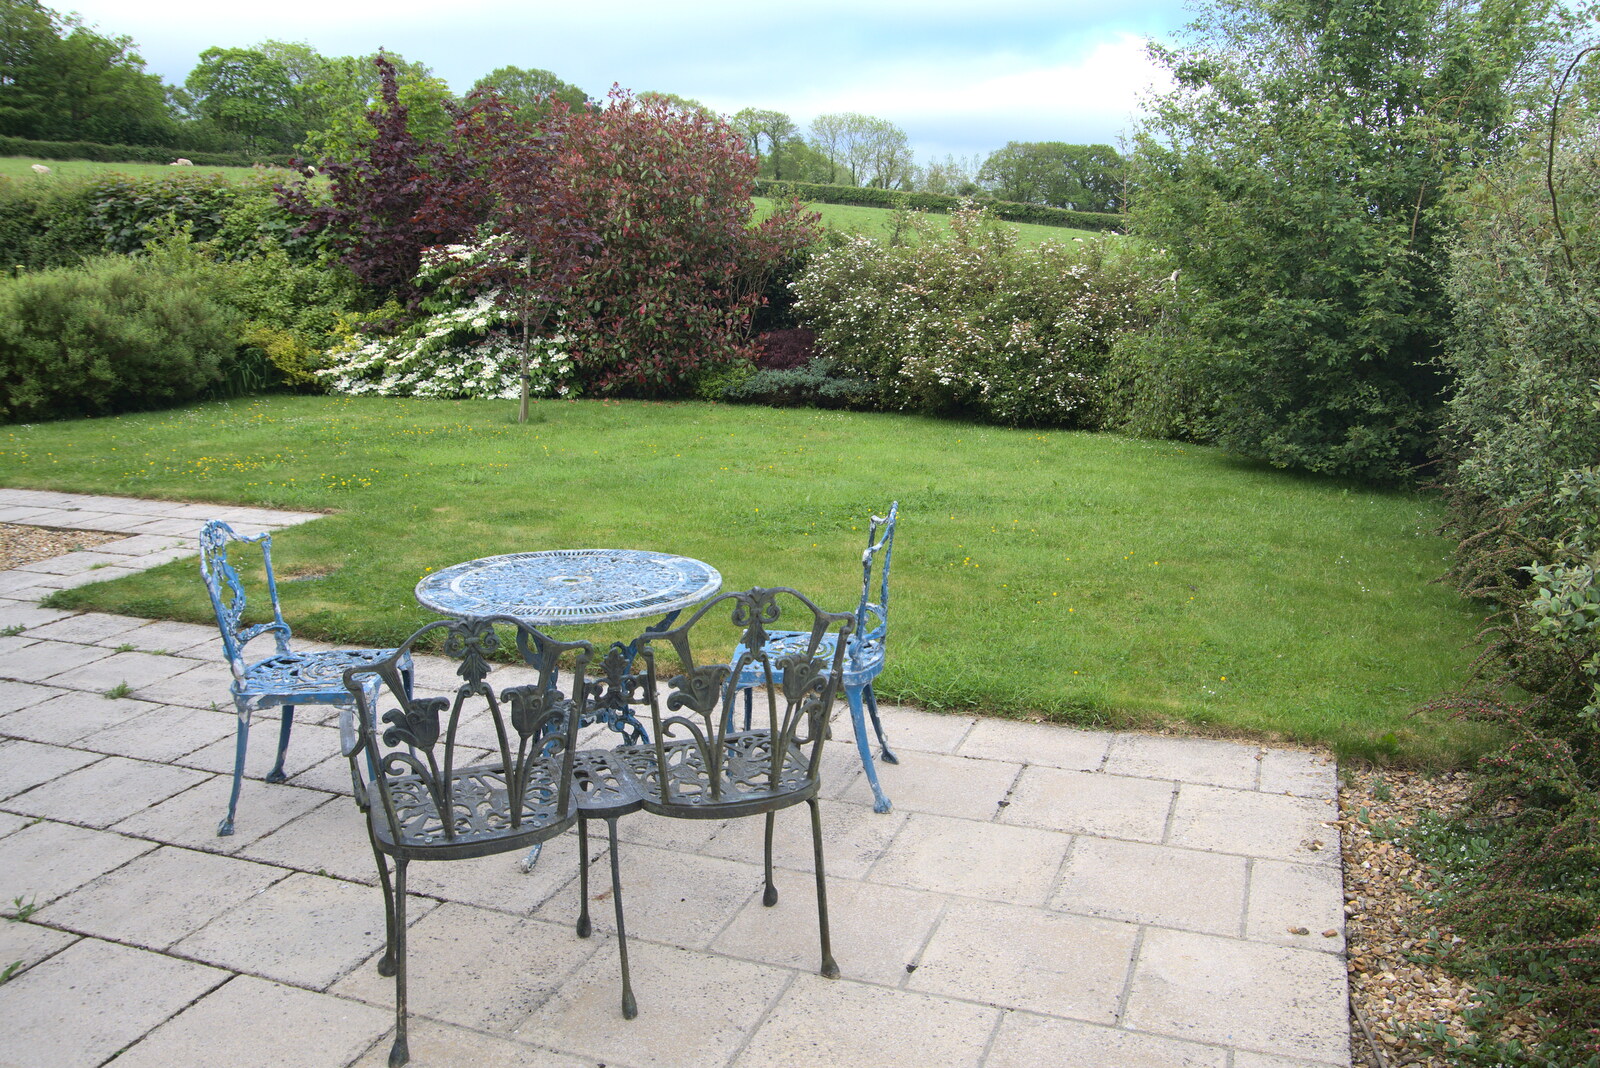 Mother's patio and garden from A Trip to Grandma J's, Spreyton, Devon - 2nd June 2021